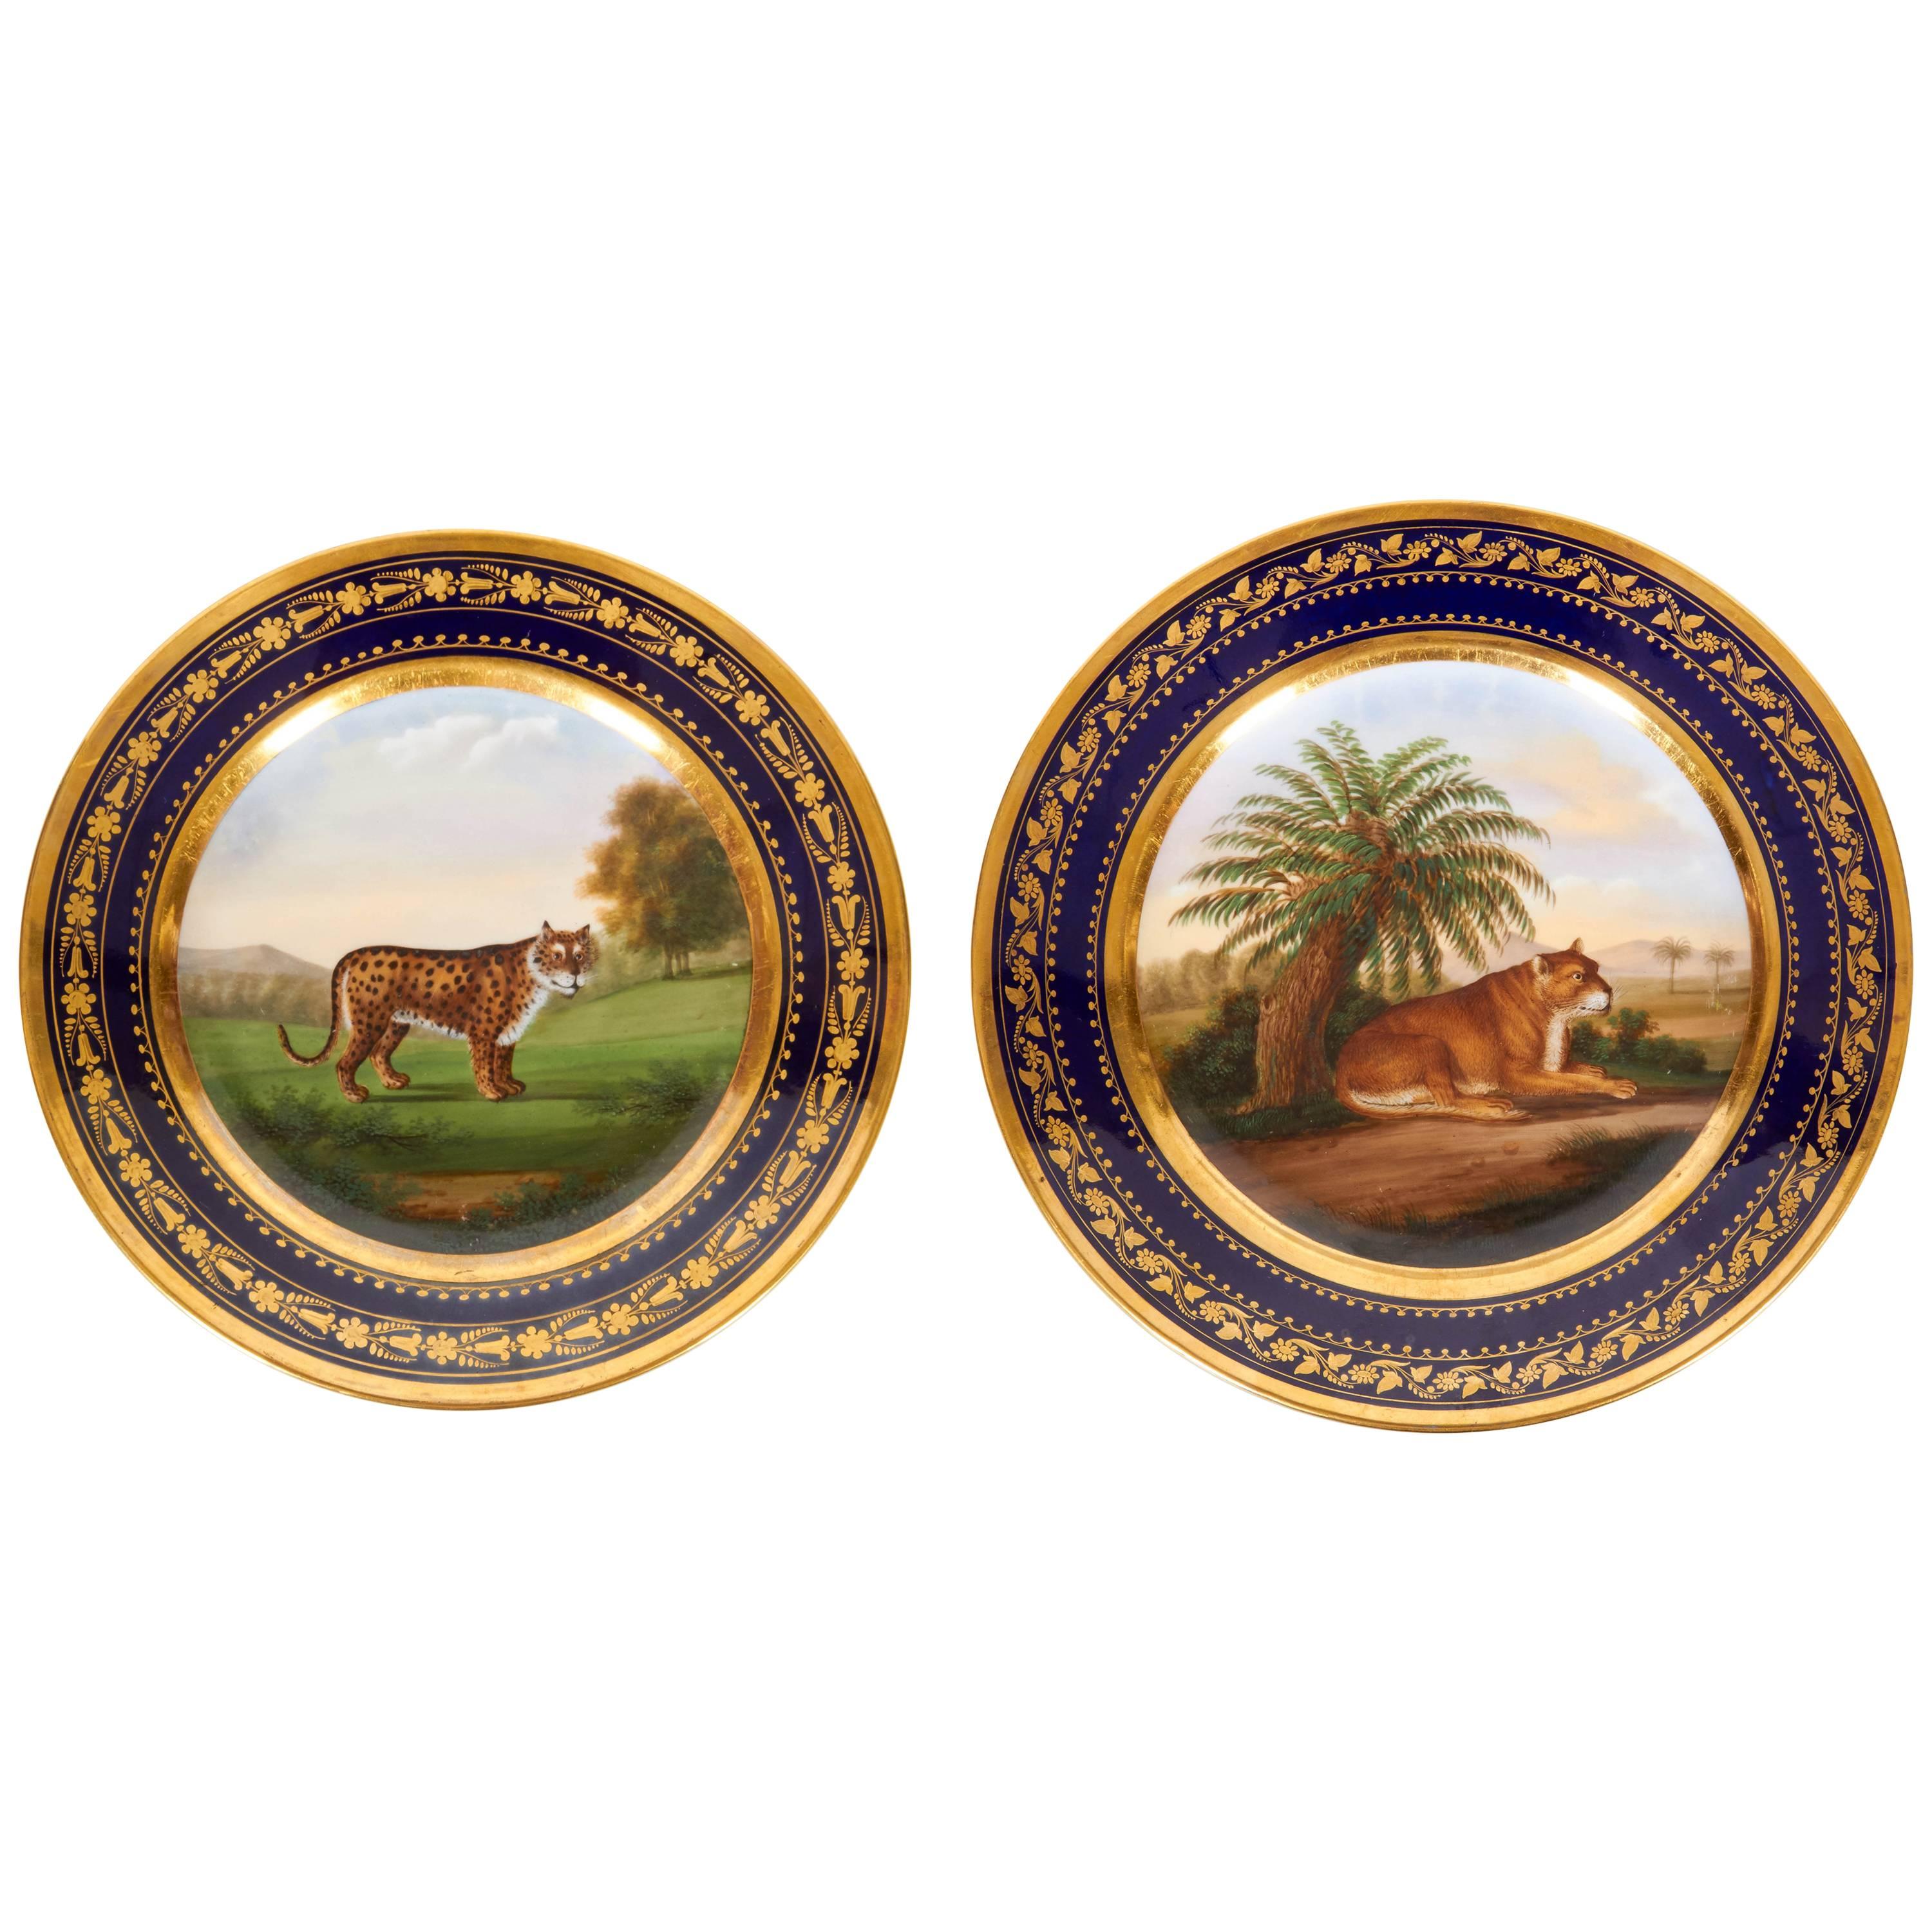 Pair of "Darte Brothers" Porcelain Plates of Lioness and Cheetah